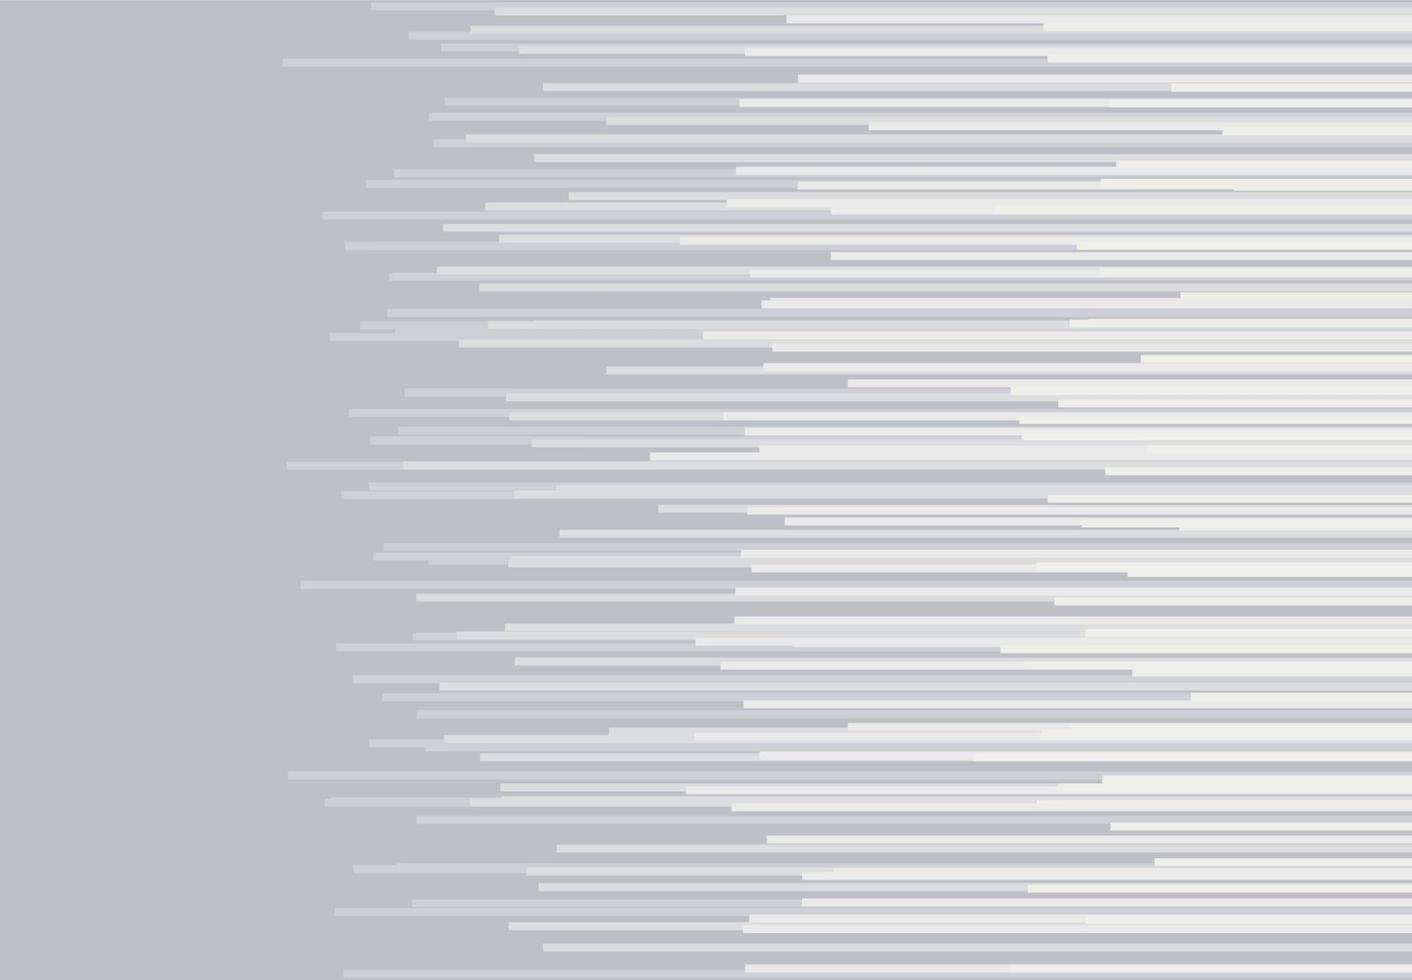 Abstract monochrome background with straight lines. Vector illustration.